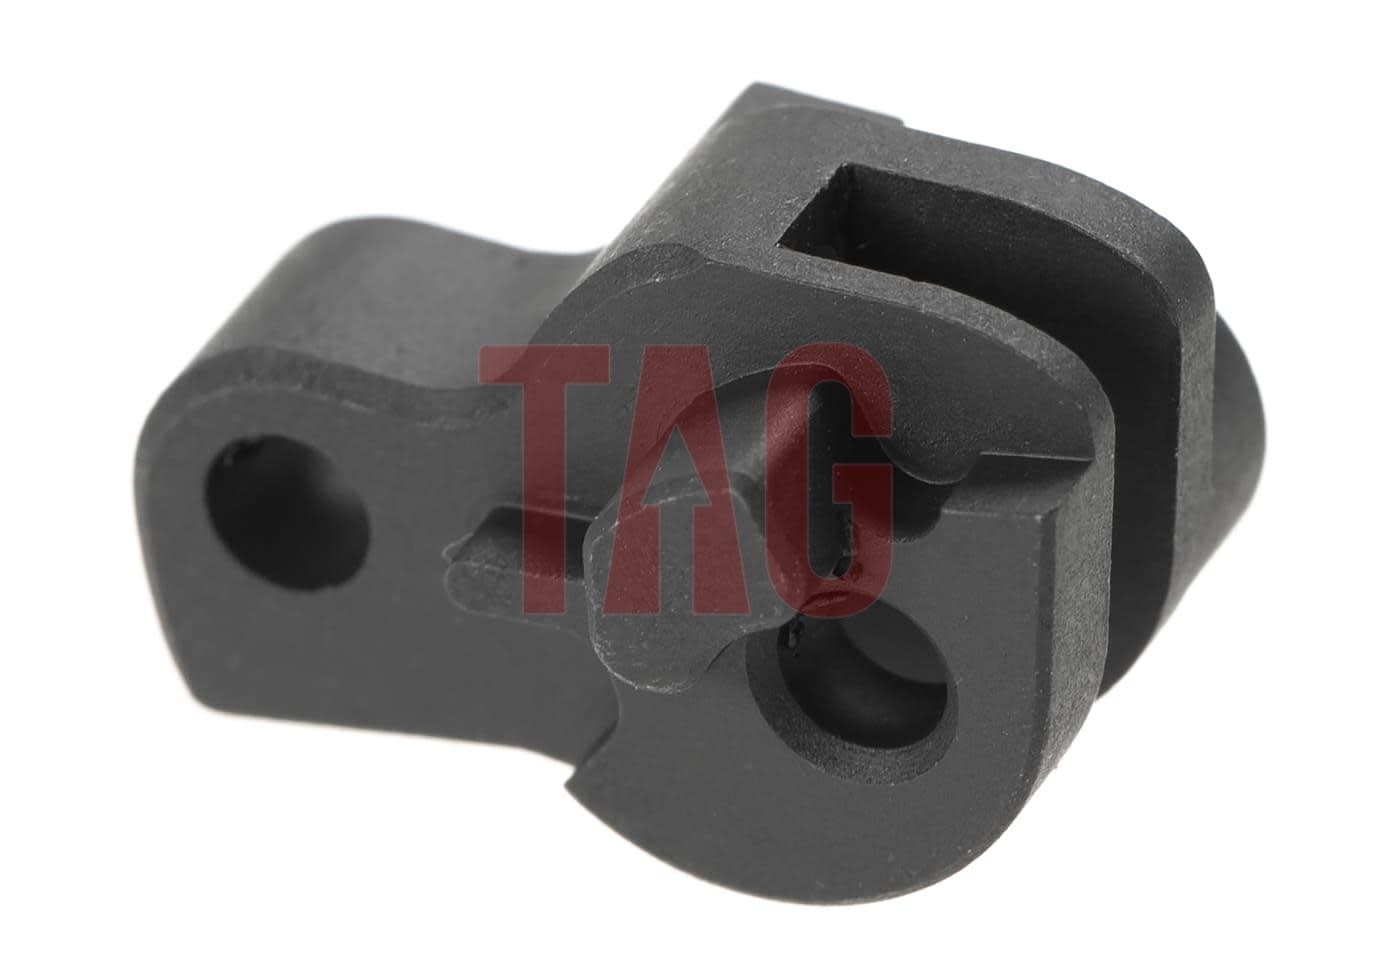 Action Army AAP01 / TM G18C CNC Steel Hammer